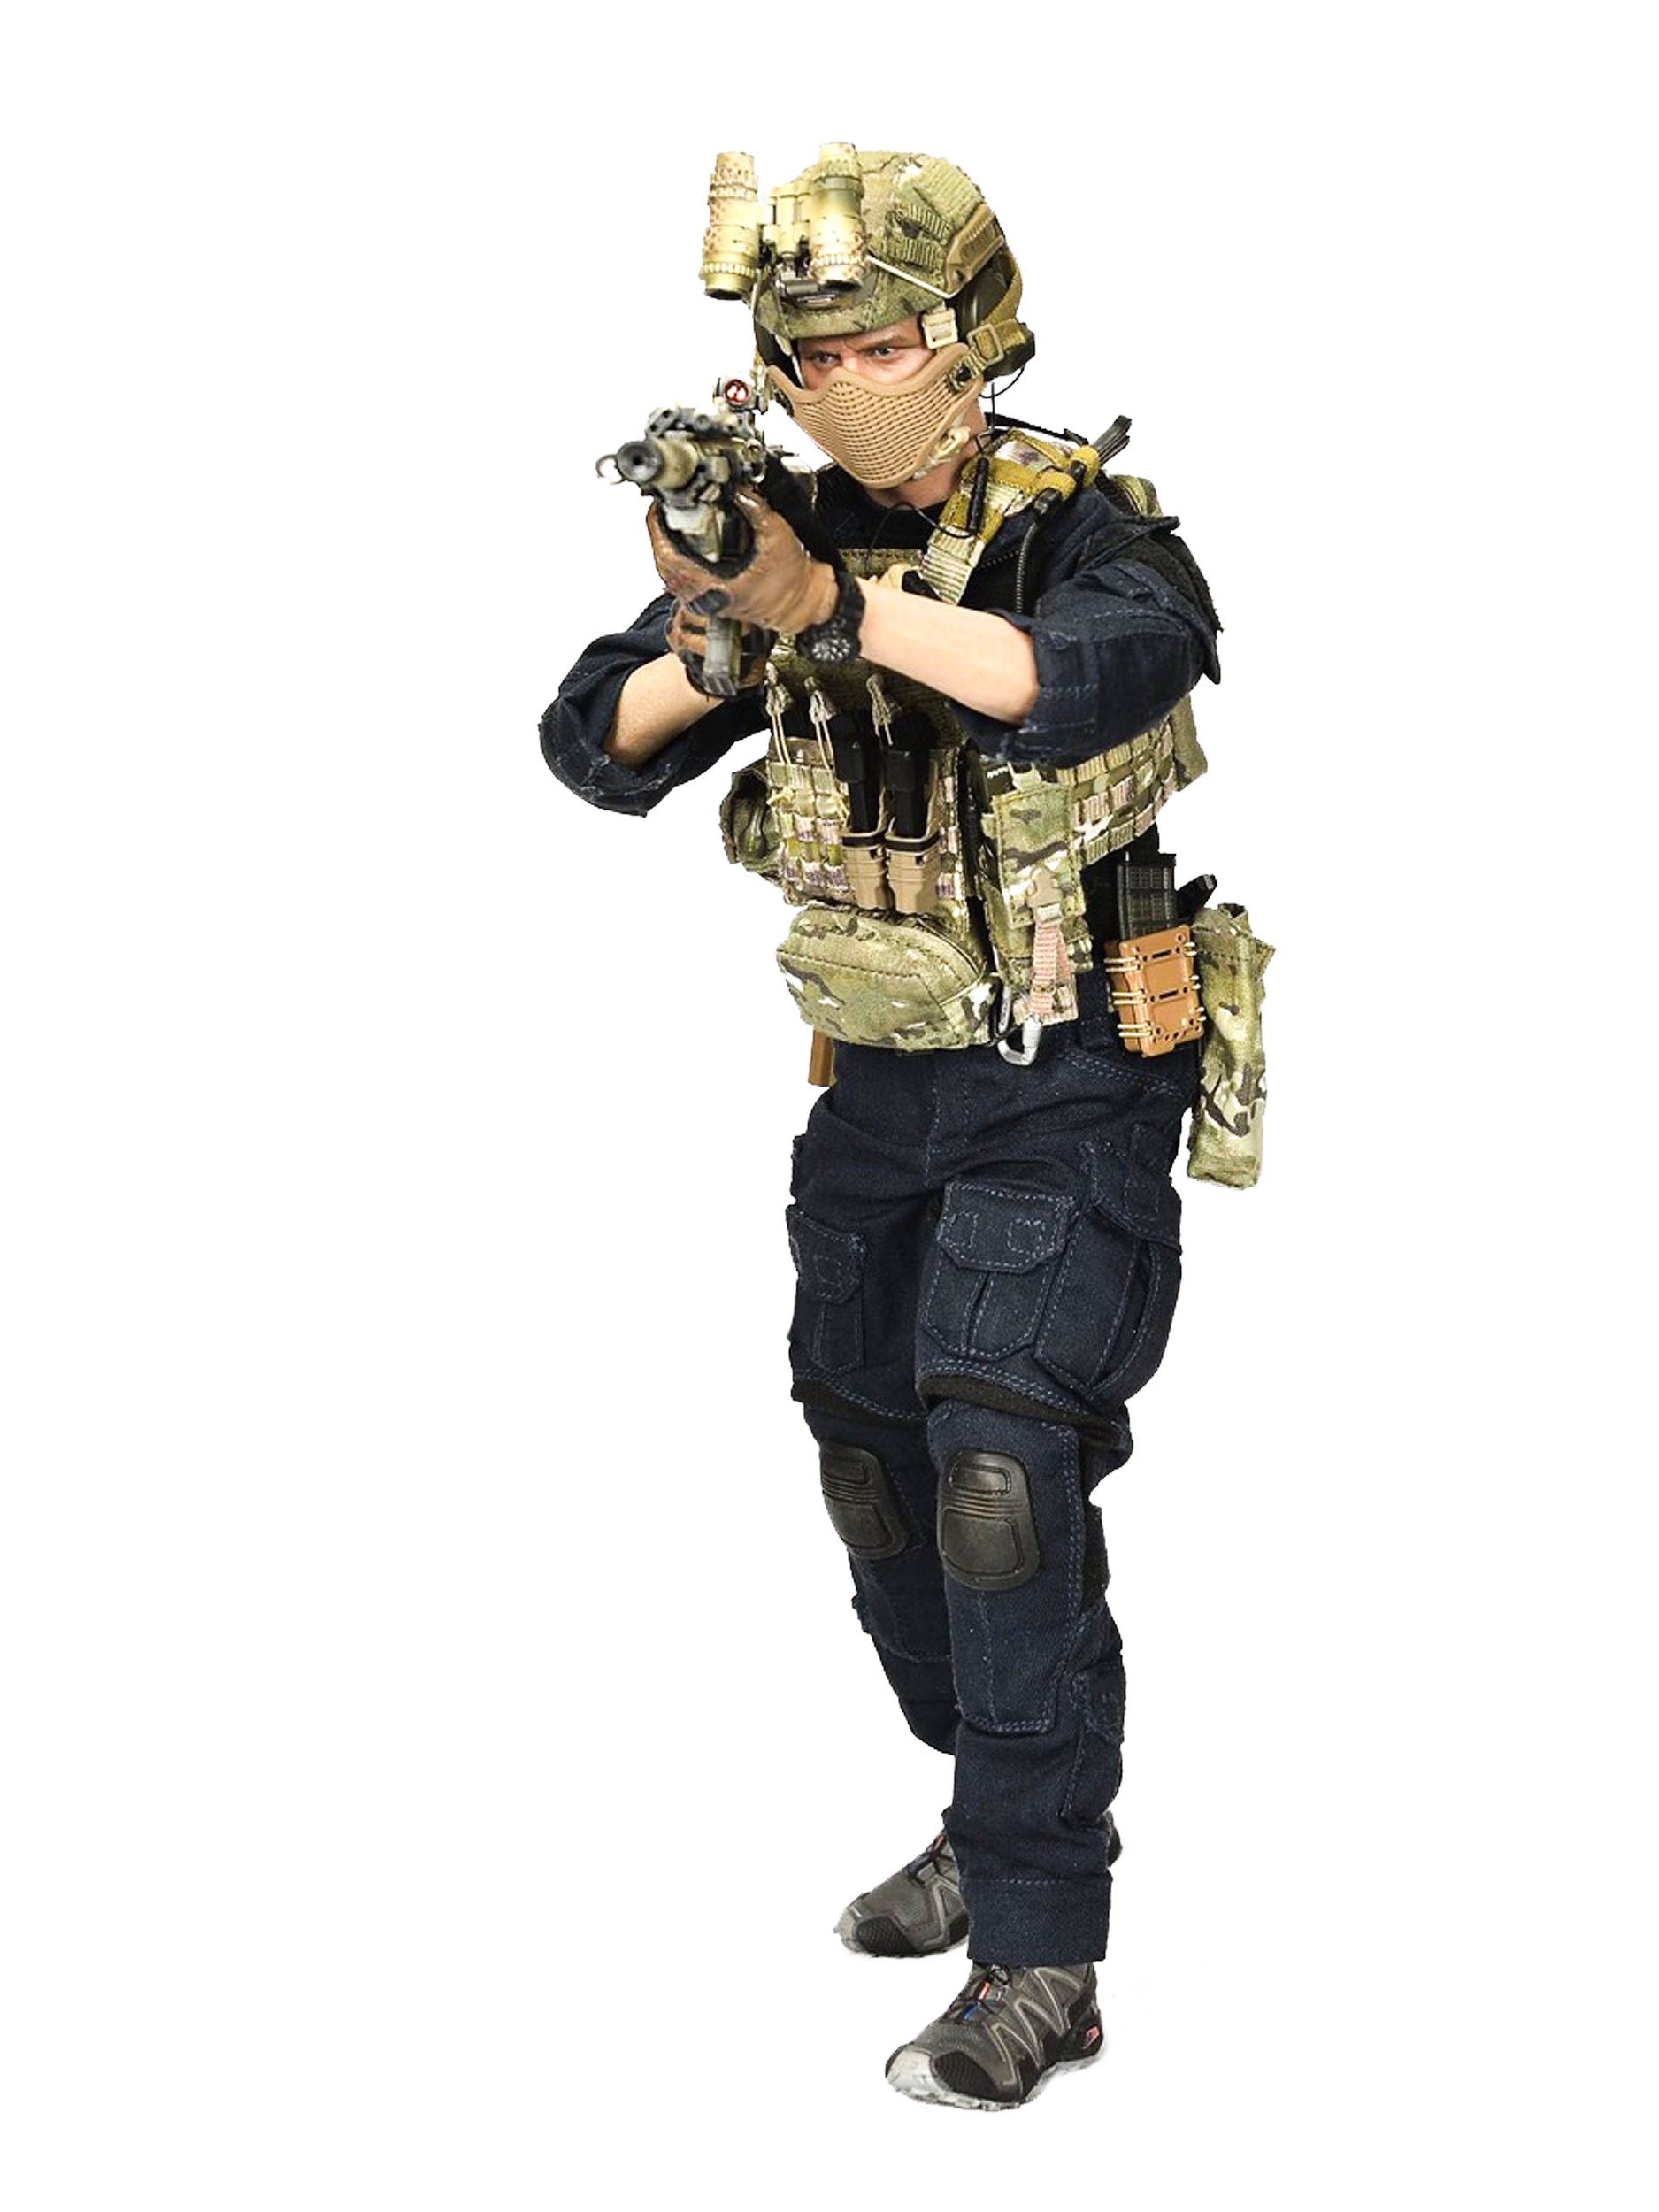 Easy &amp; Simple - 26022S - Special Air Service Counter Revolutionary Warfare - Assaulter (Green Wolf Gear Exlusive) - Marvelous Toys